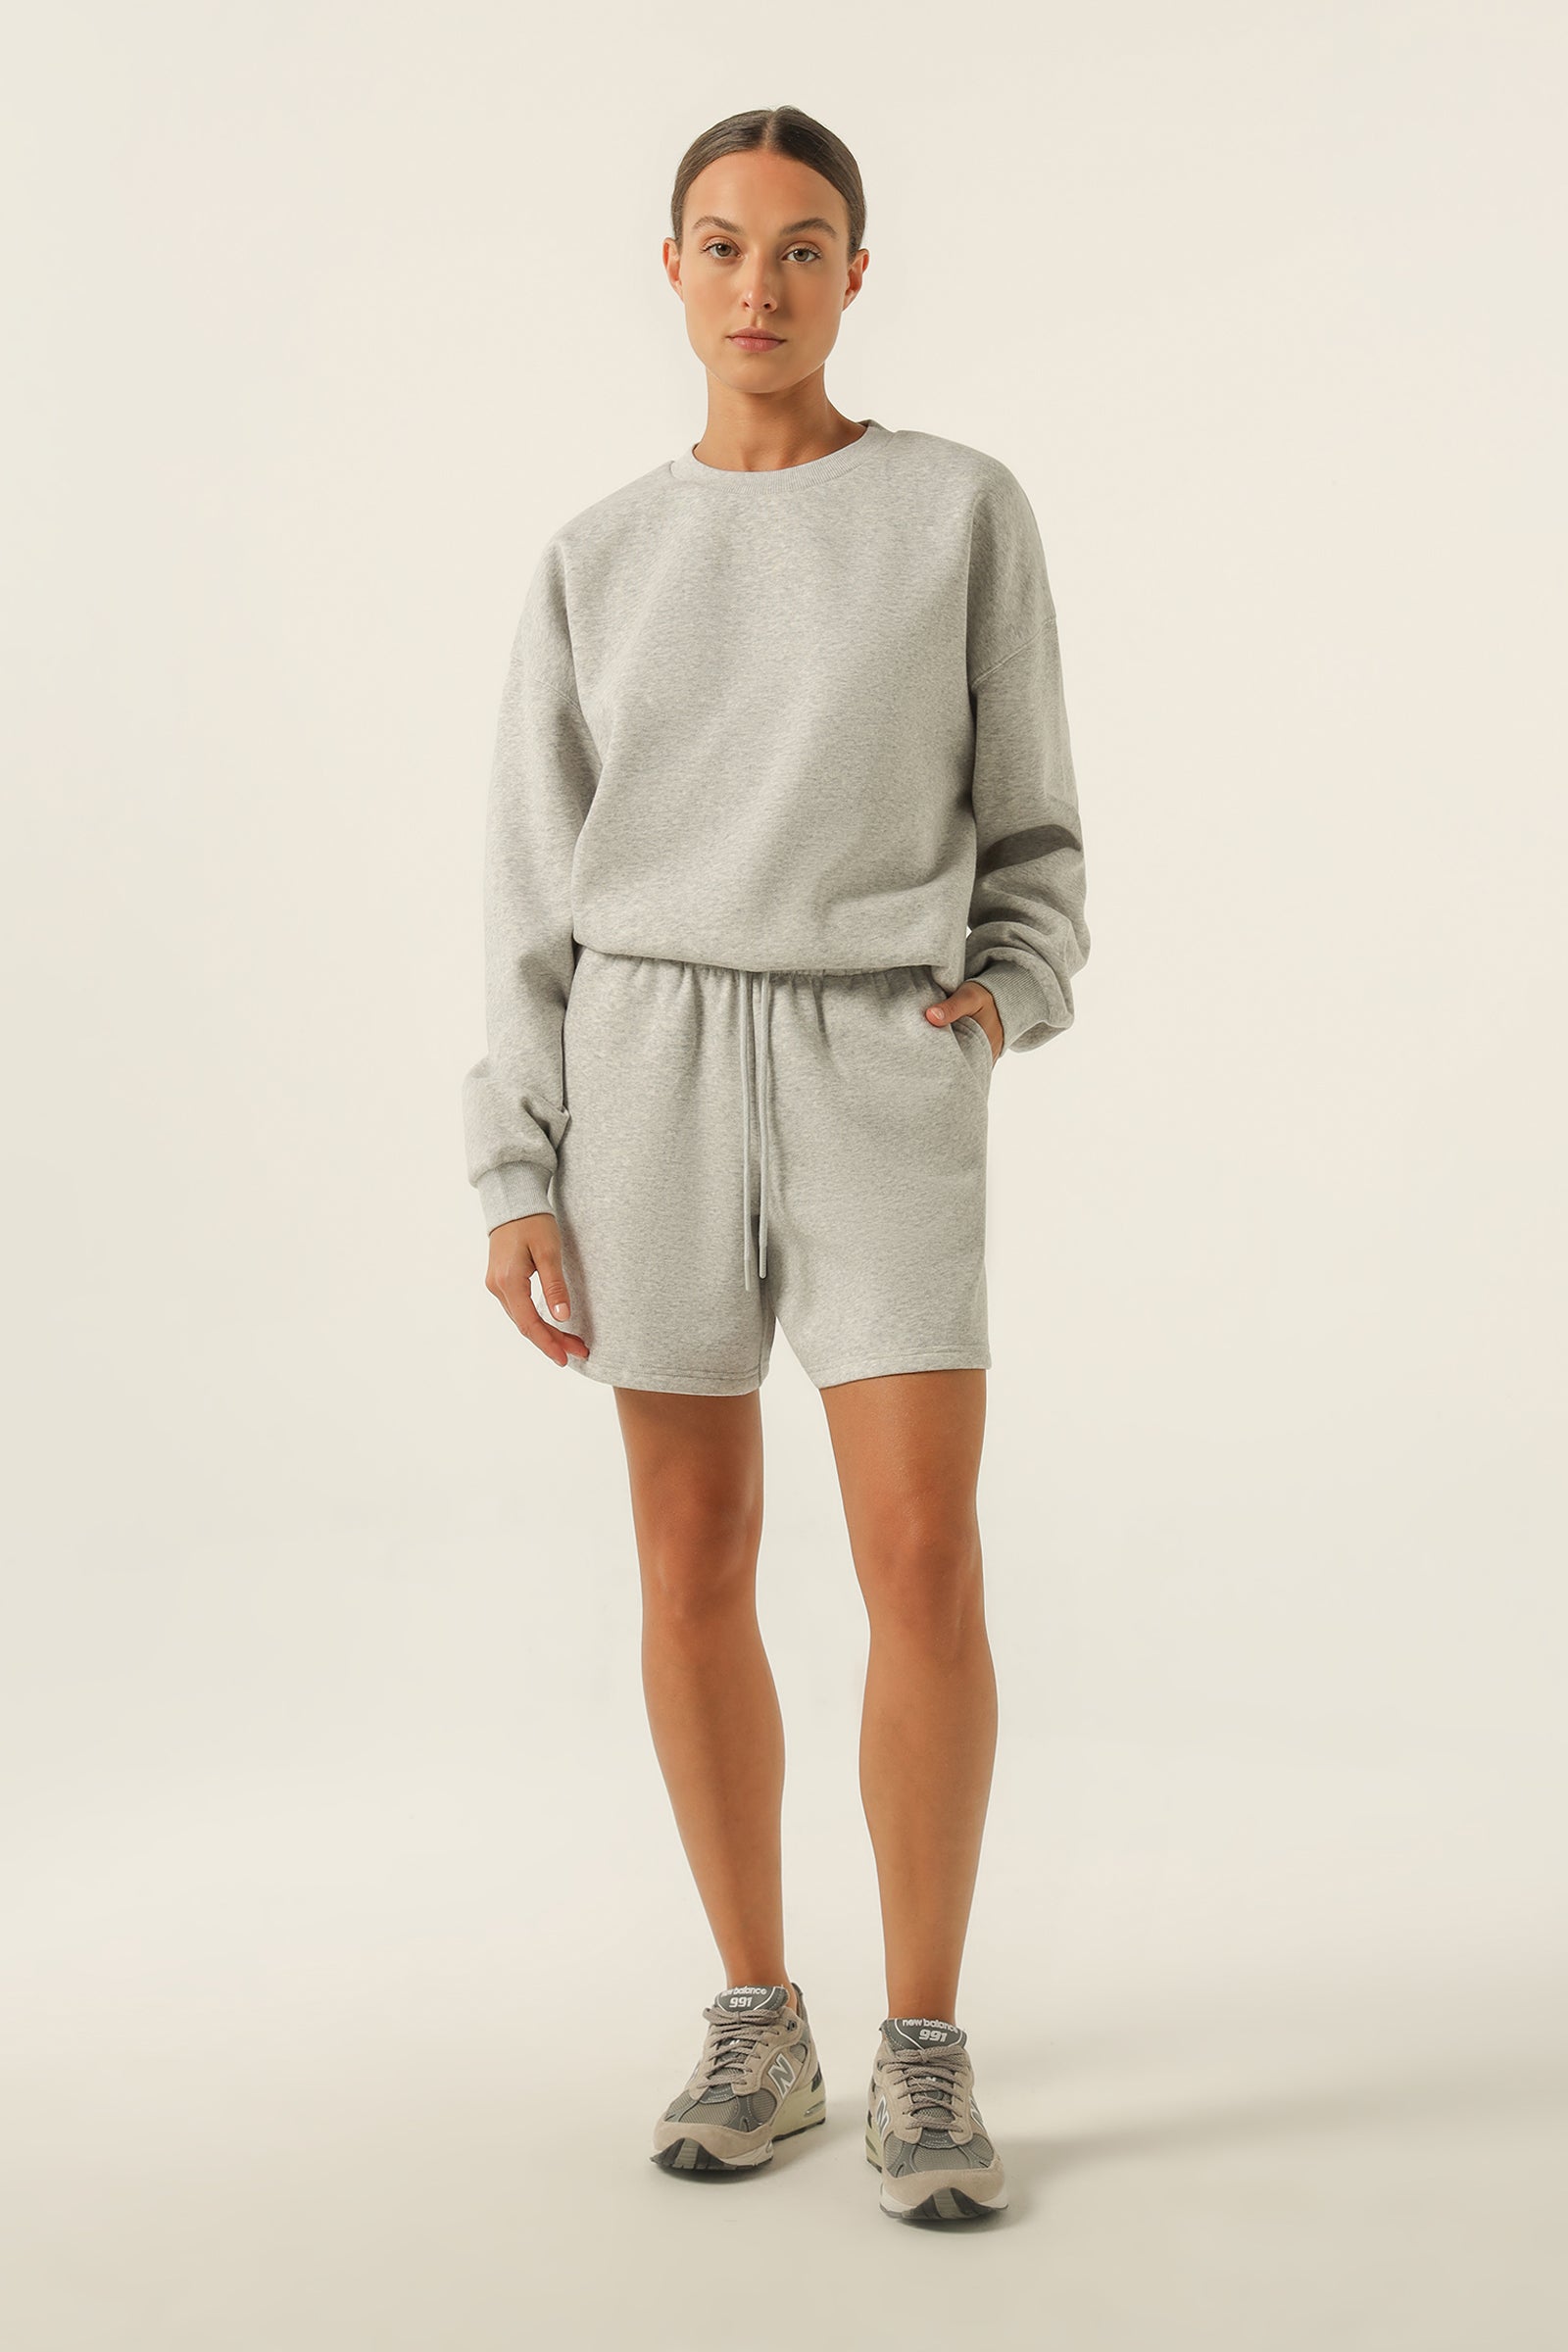 Nude Lucy Carter Curated Short In Grey Marle 